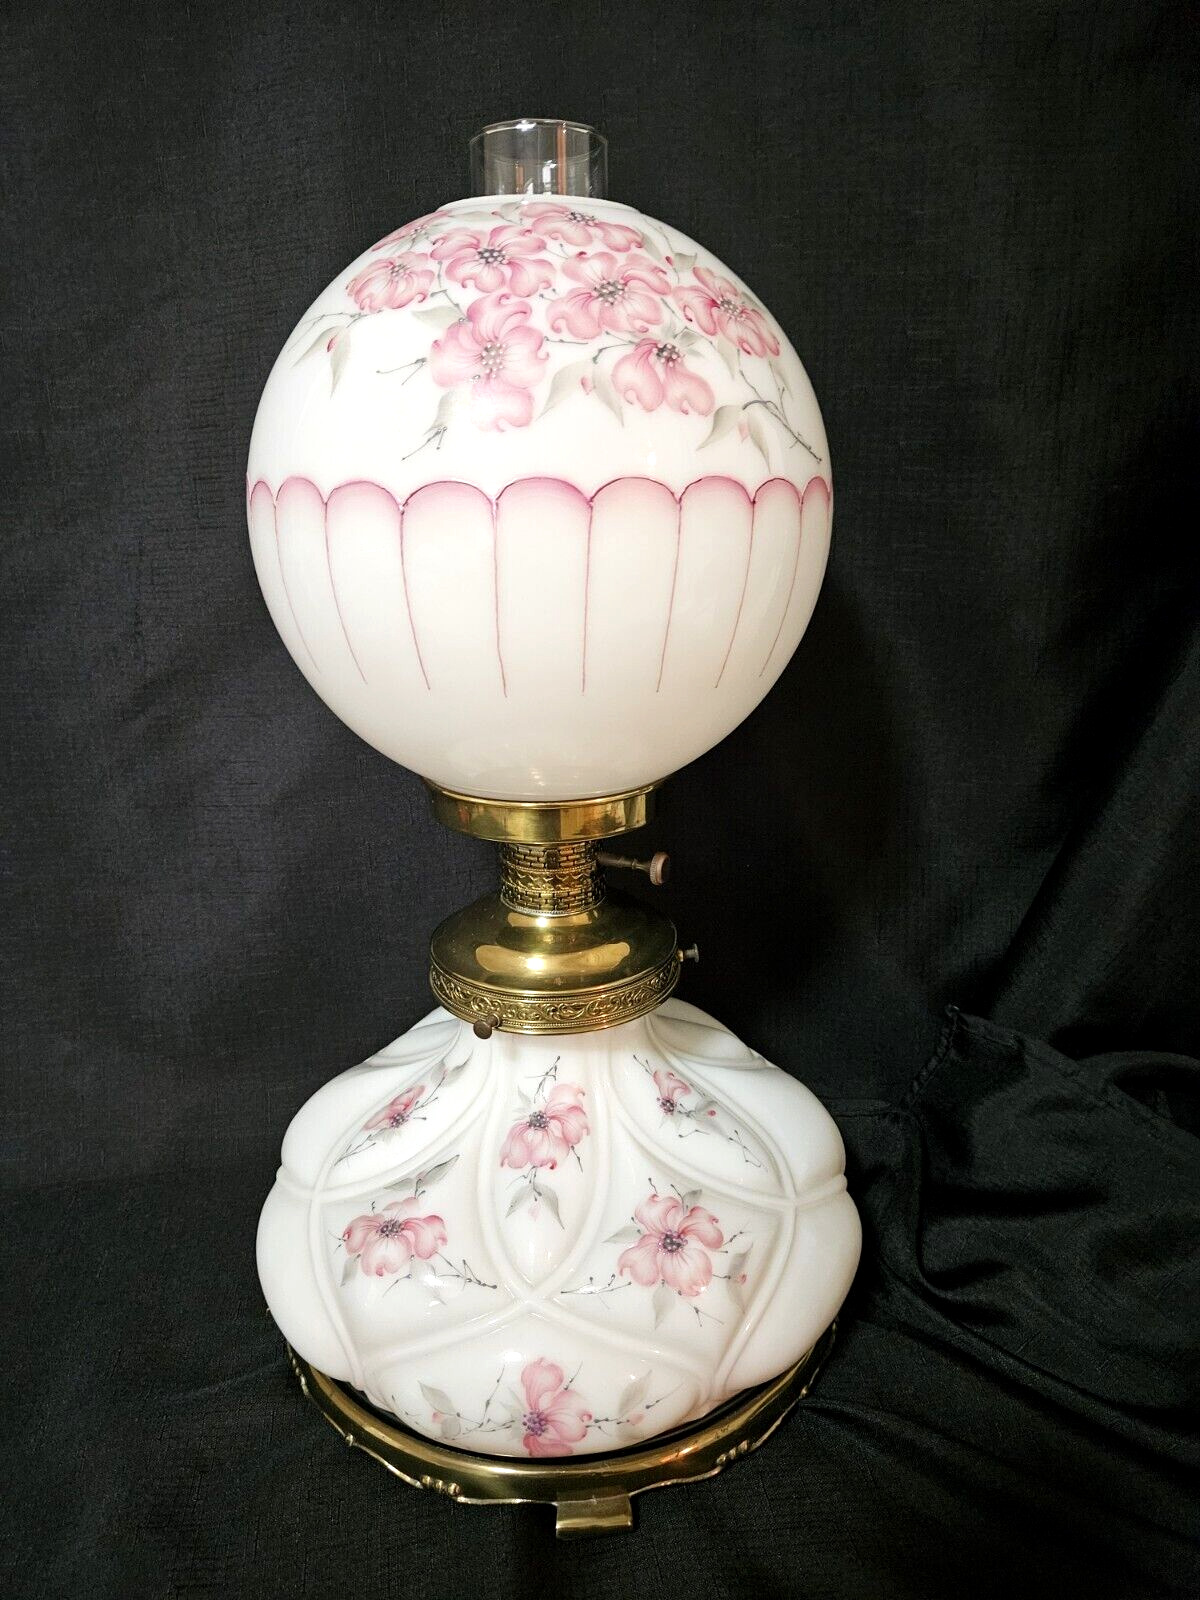 EXQUISITE Vintage Cambridge Parlor Lamp 'Gone With the Wind' Style Hand Painted